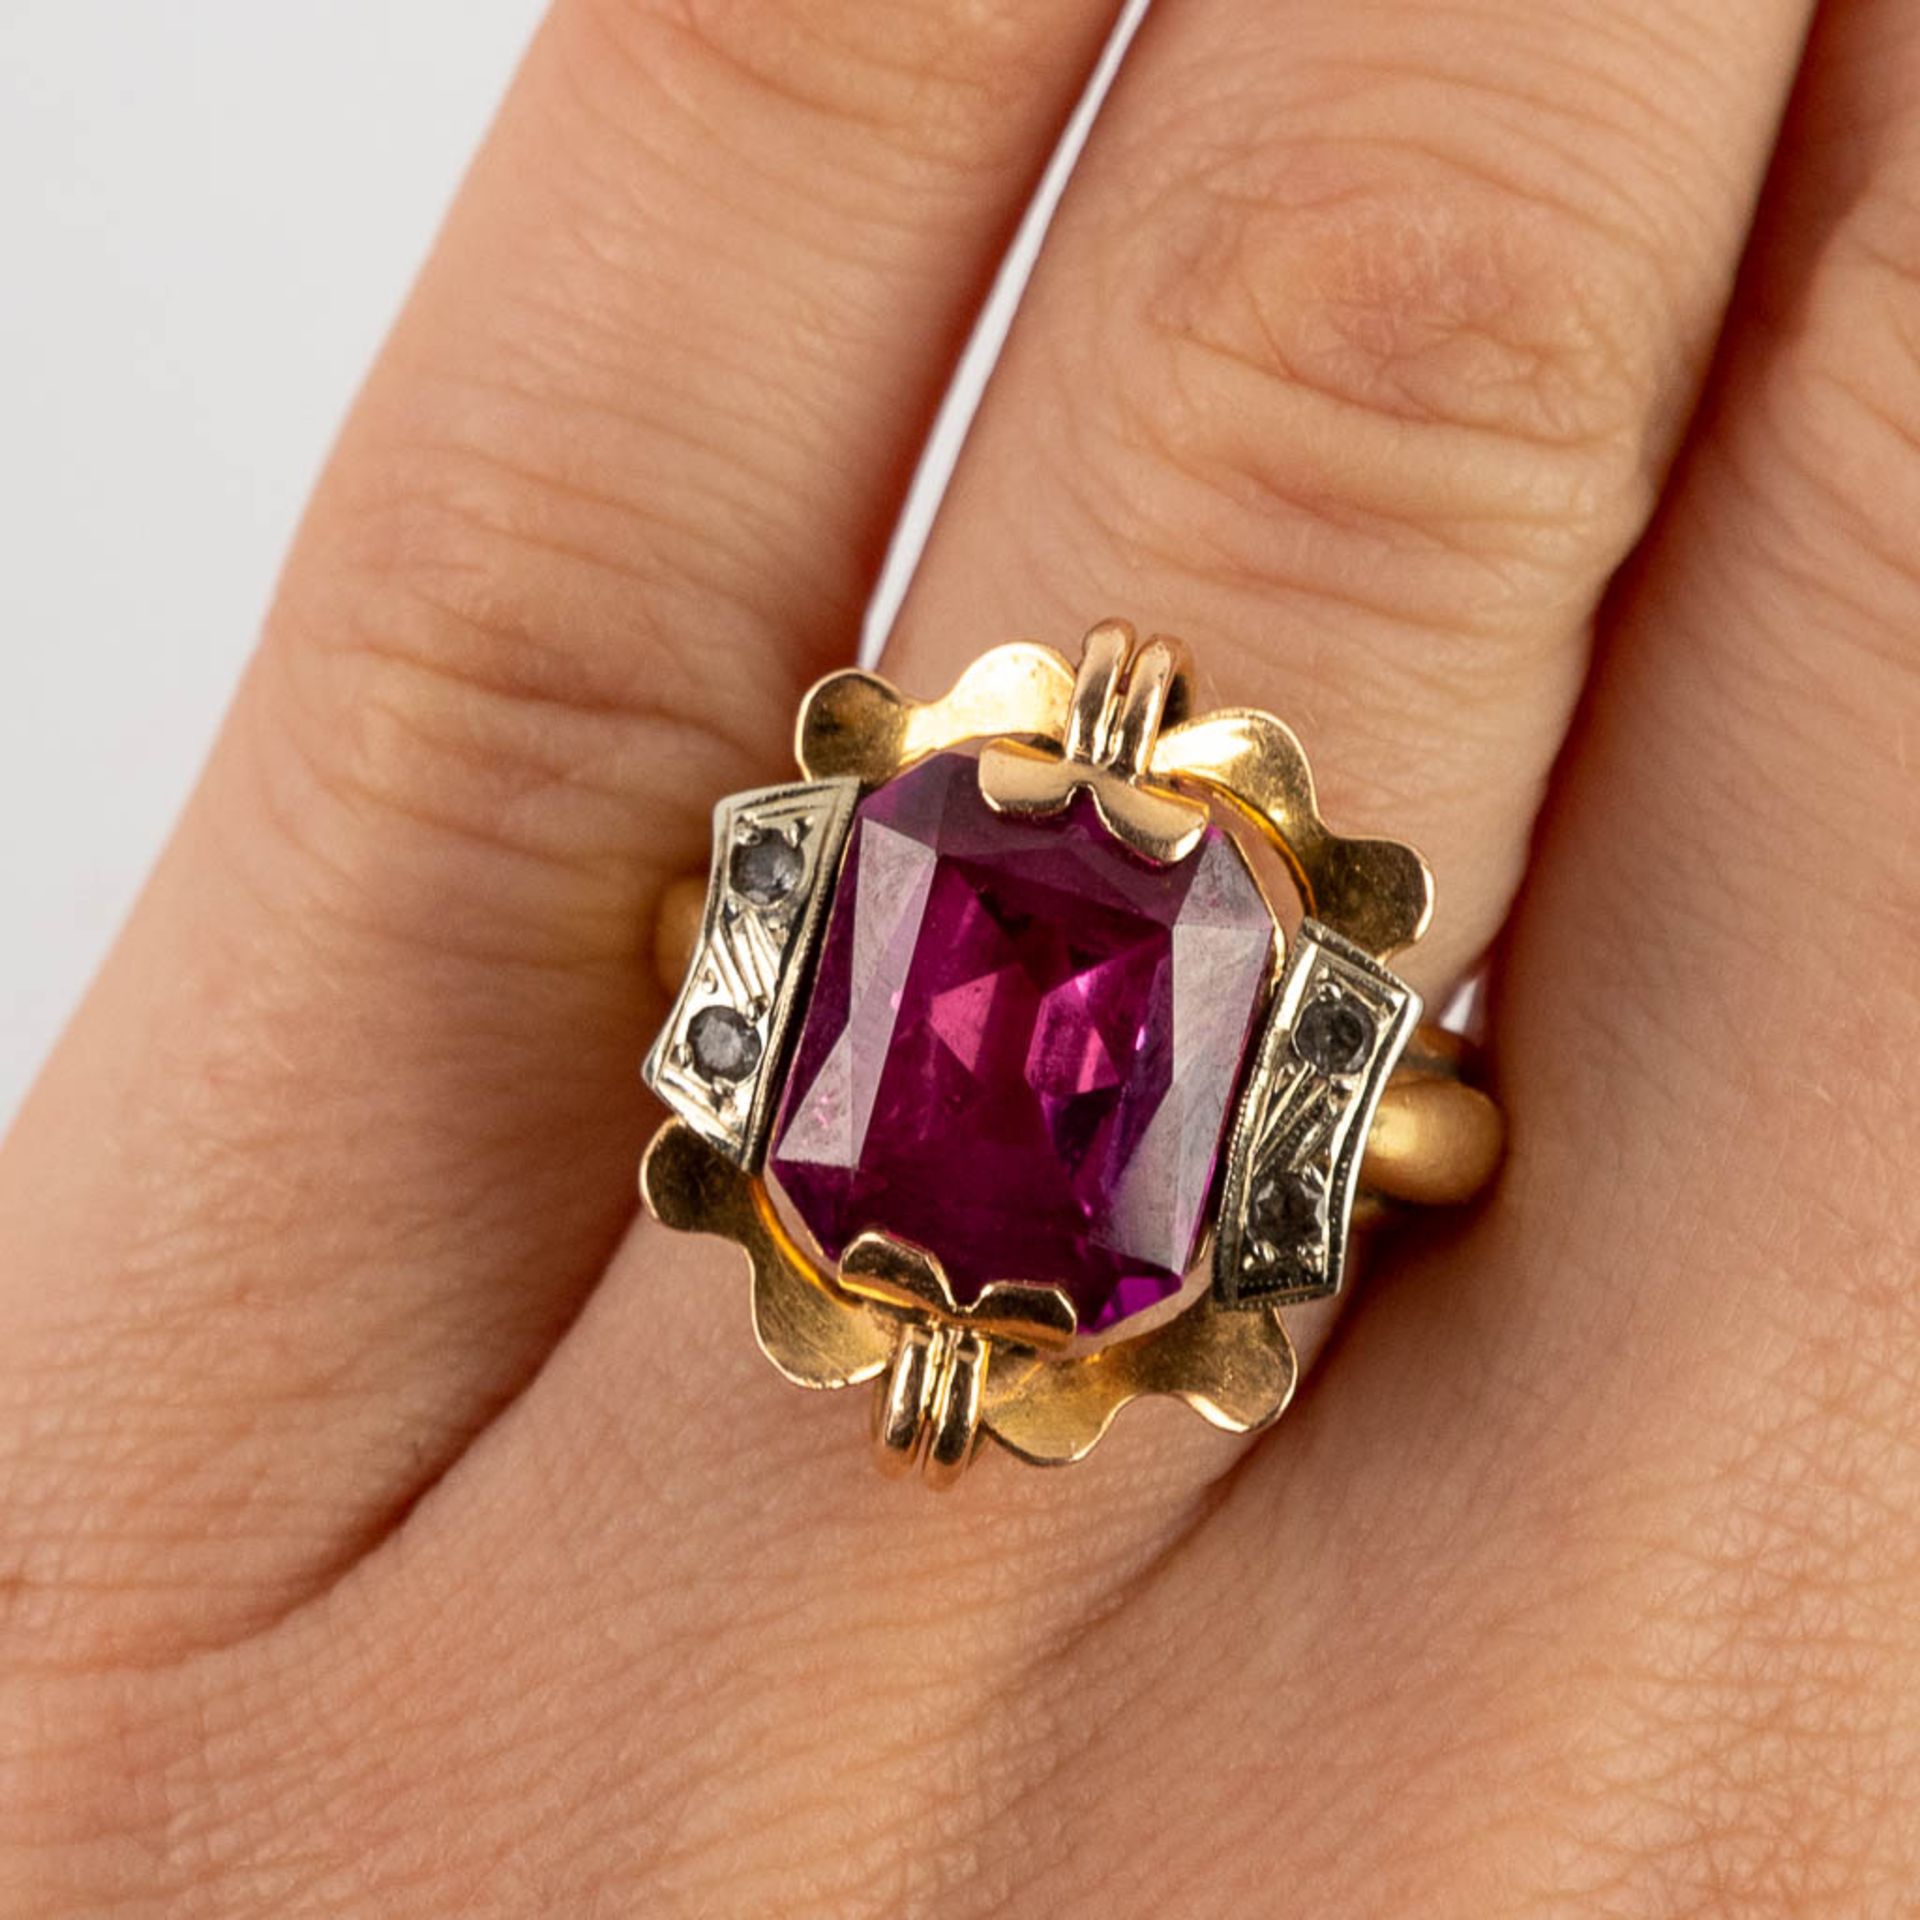 A yellow gold ring with a cut light purple stone/glass. 6,87g. Ring size: 52. - Image 9 of 9